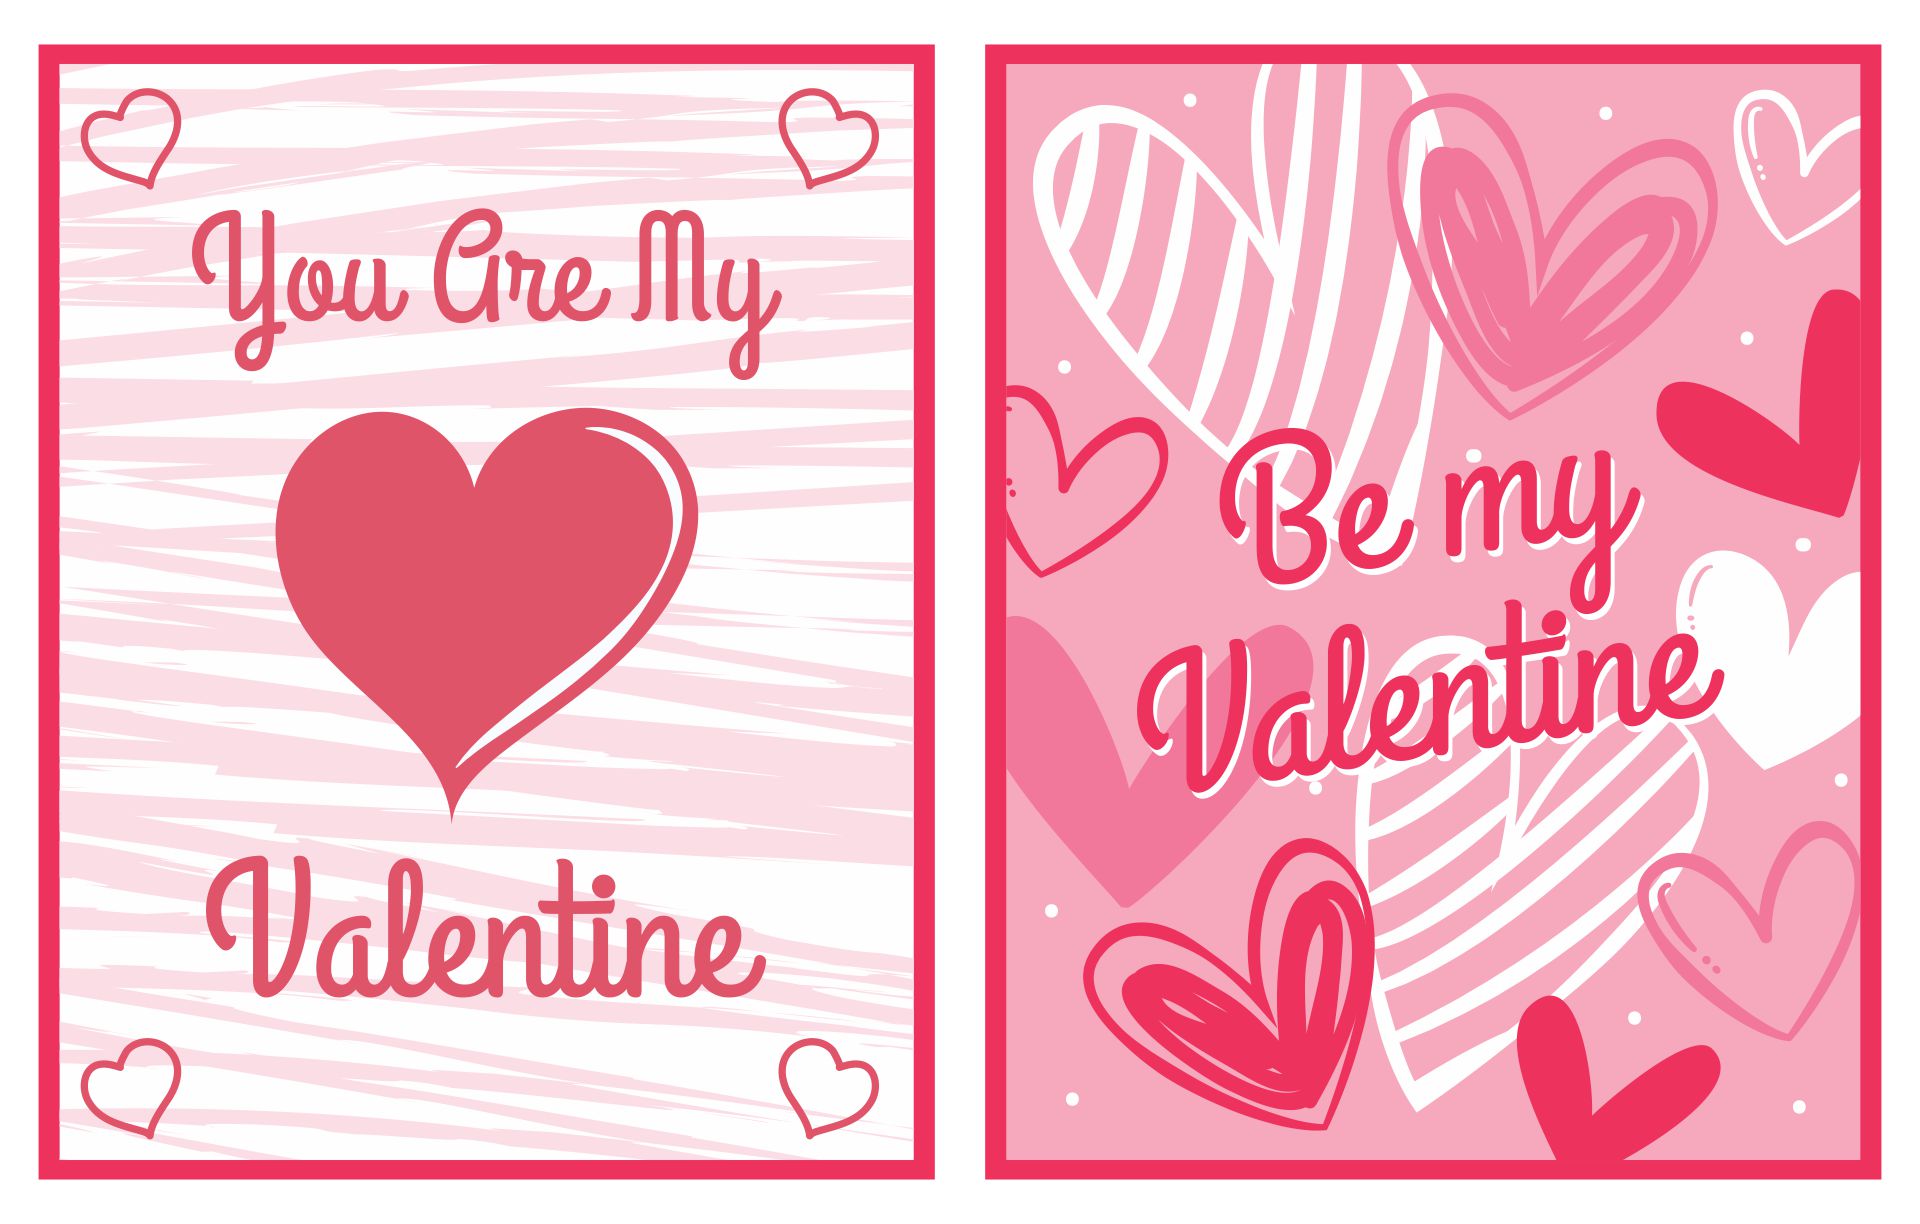 Printable Valentines Cards for Friends